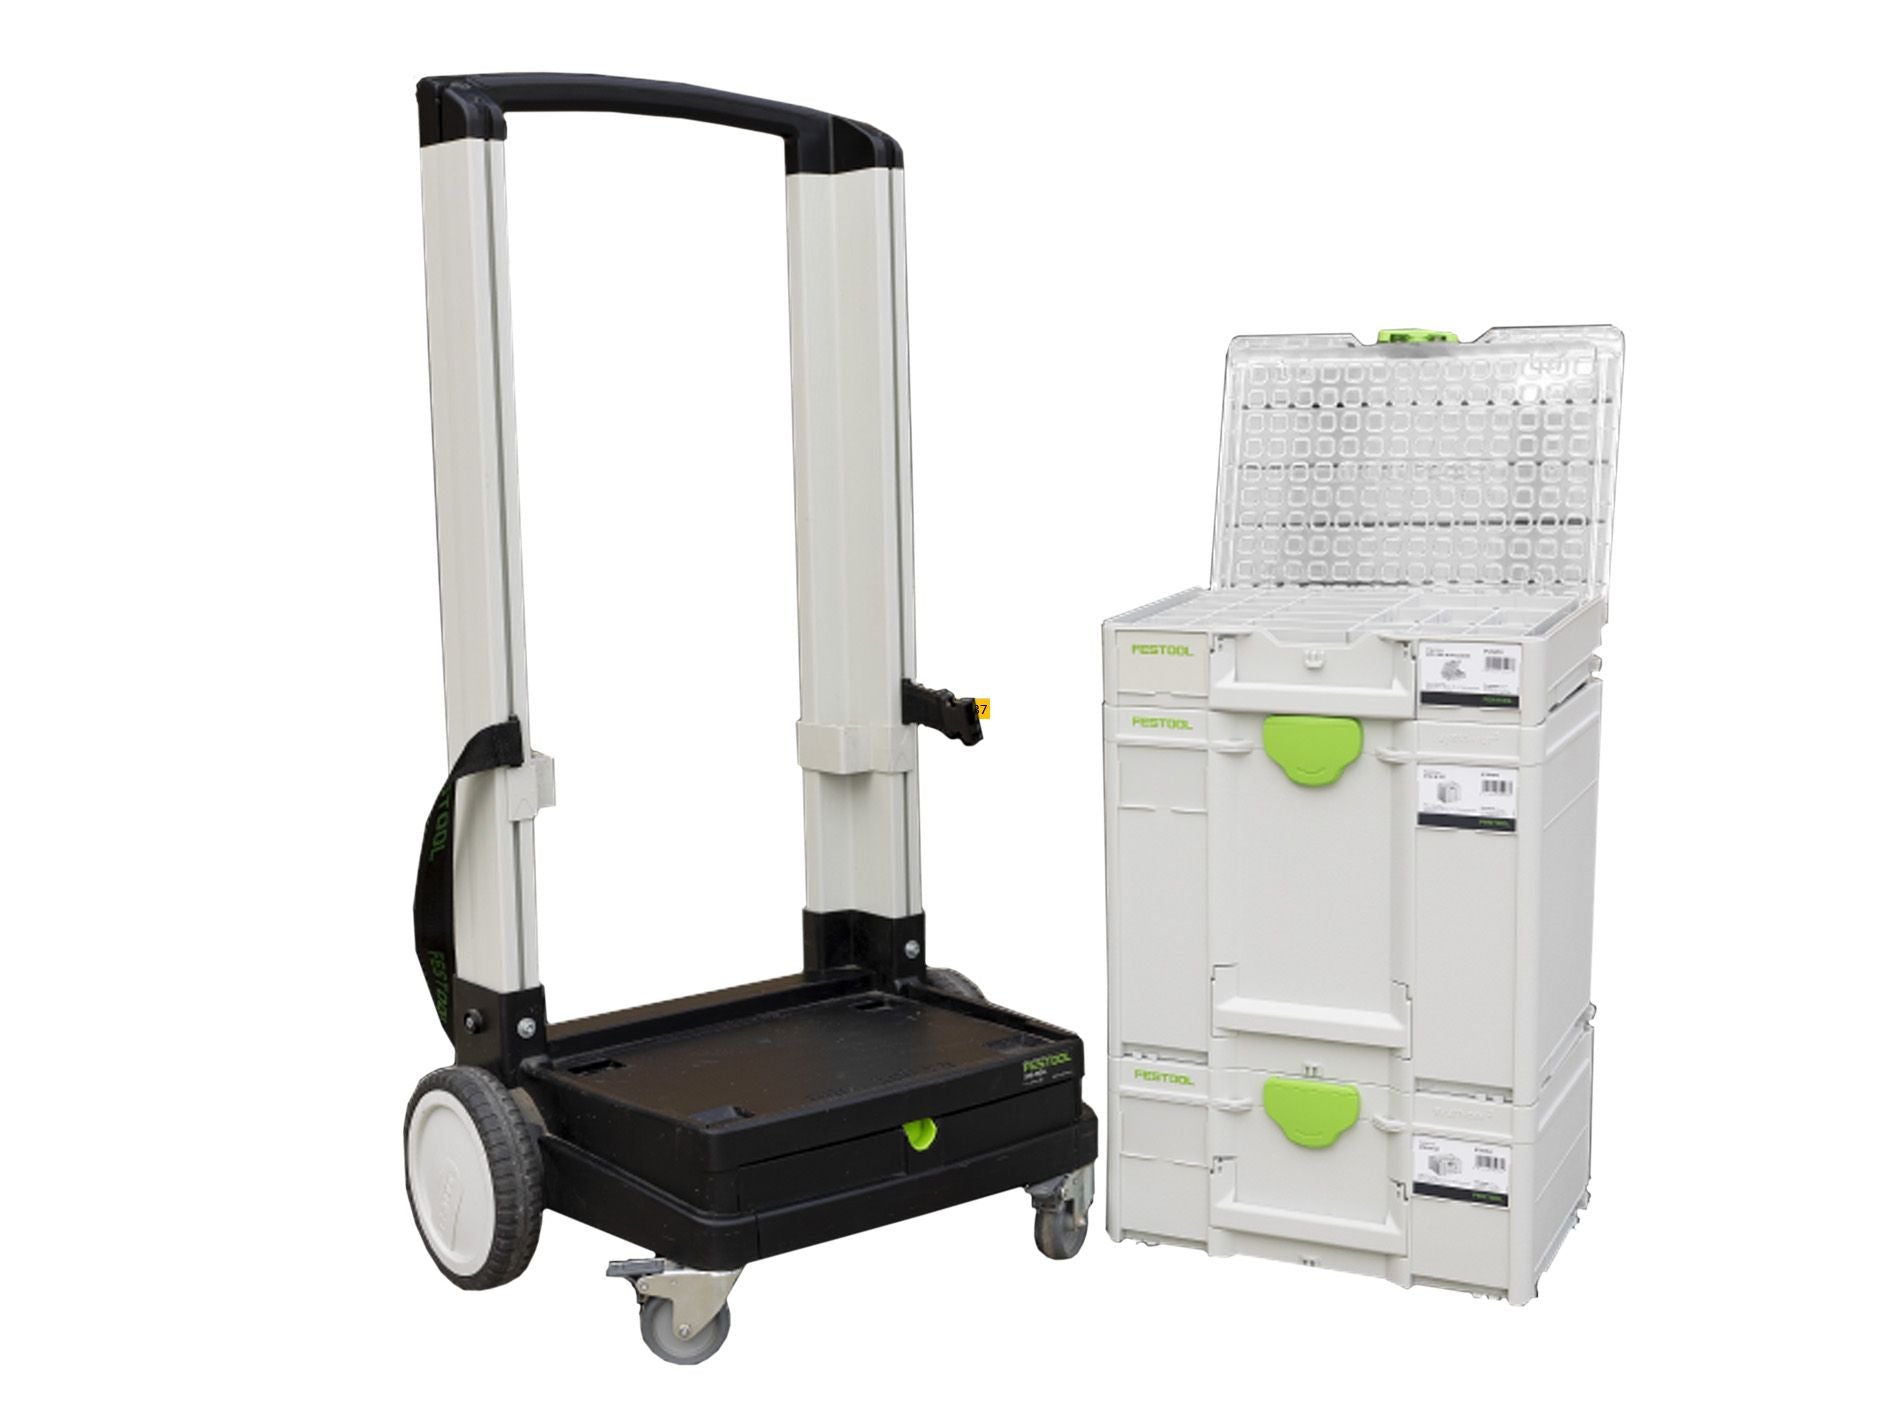 Mobile 4 Piece Systainer System F28737 By Festool